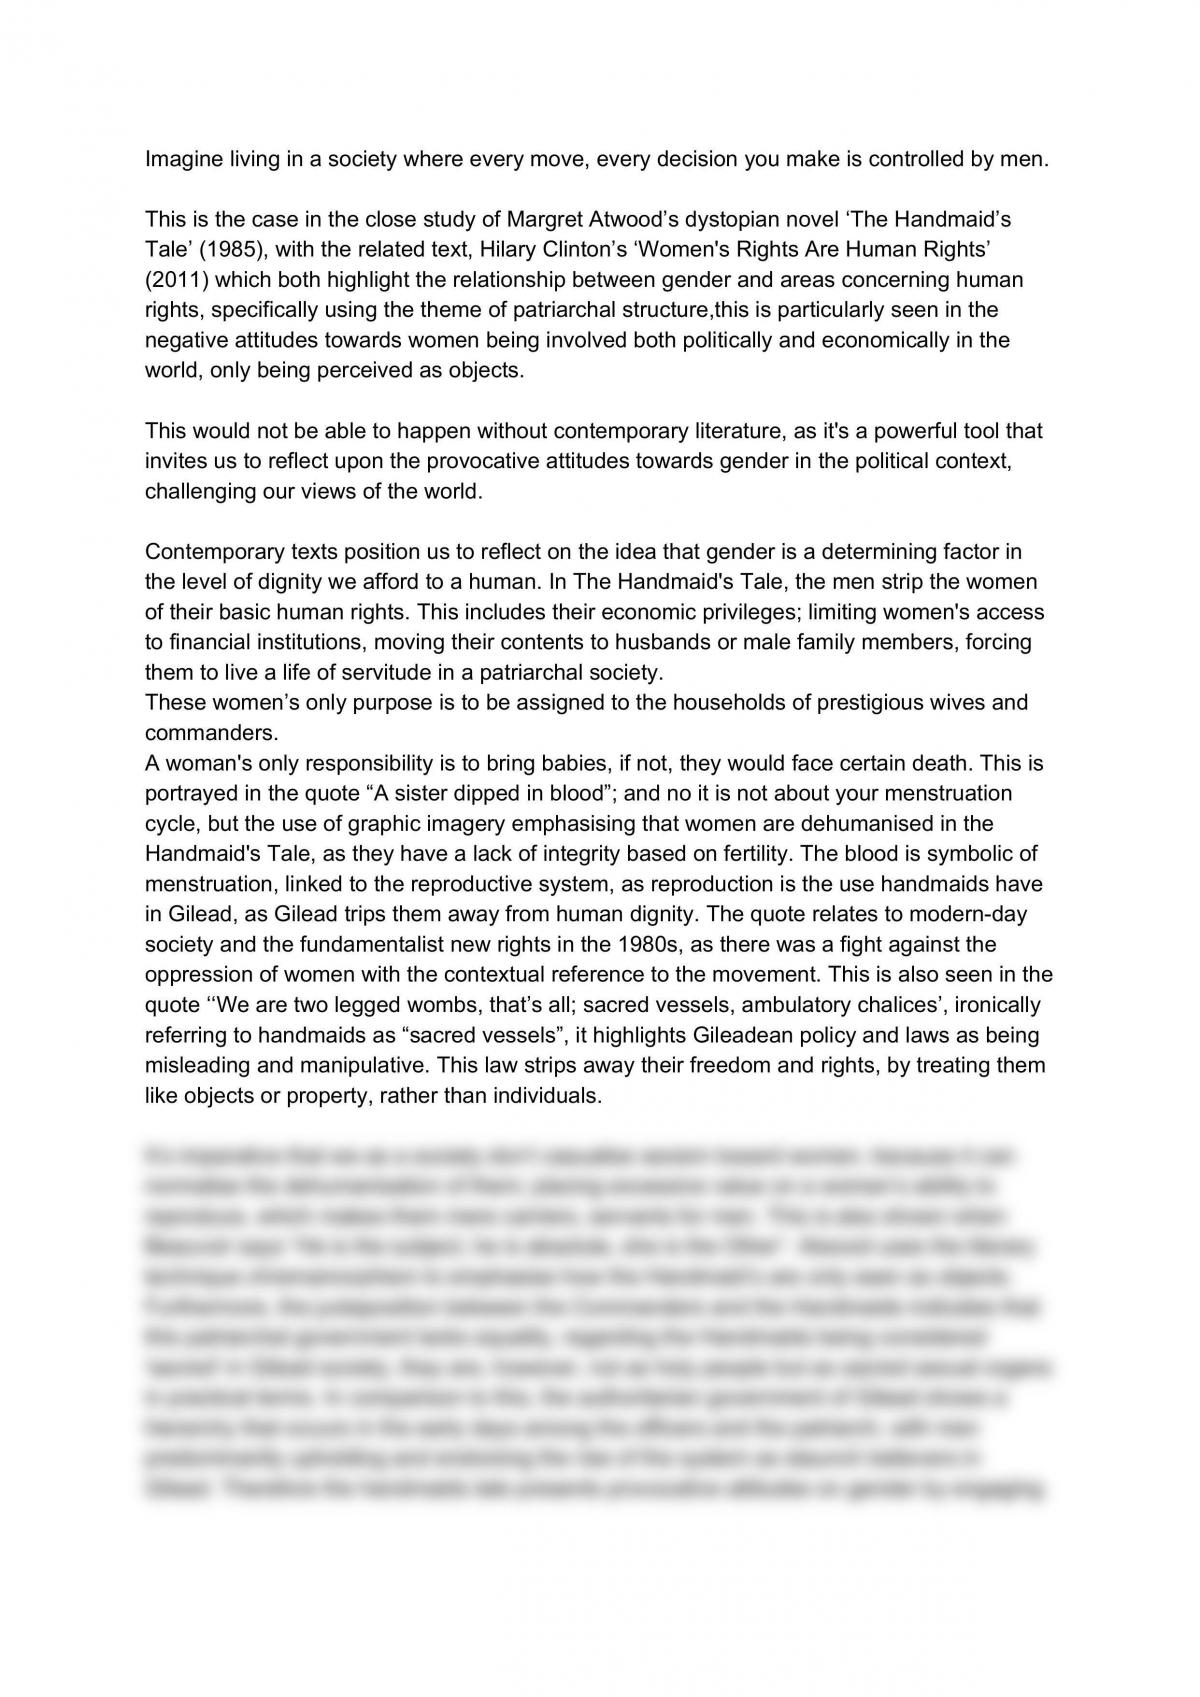 The Handmaid's Tale essay - Page 1